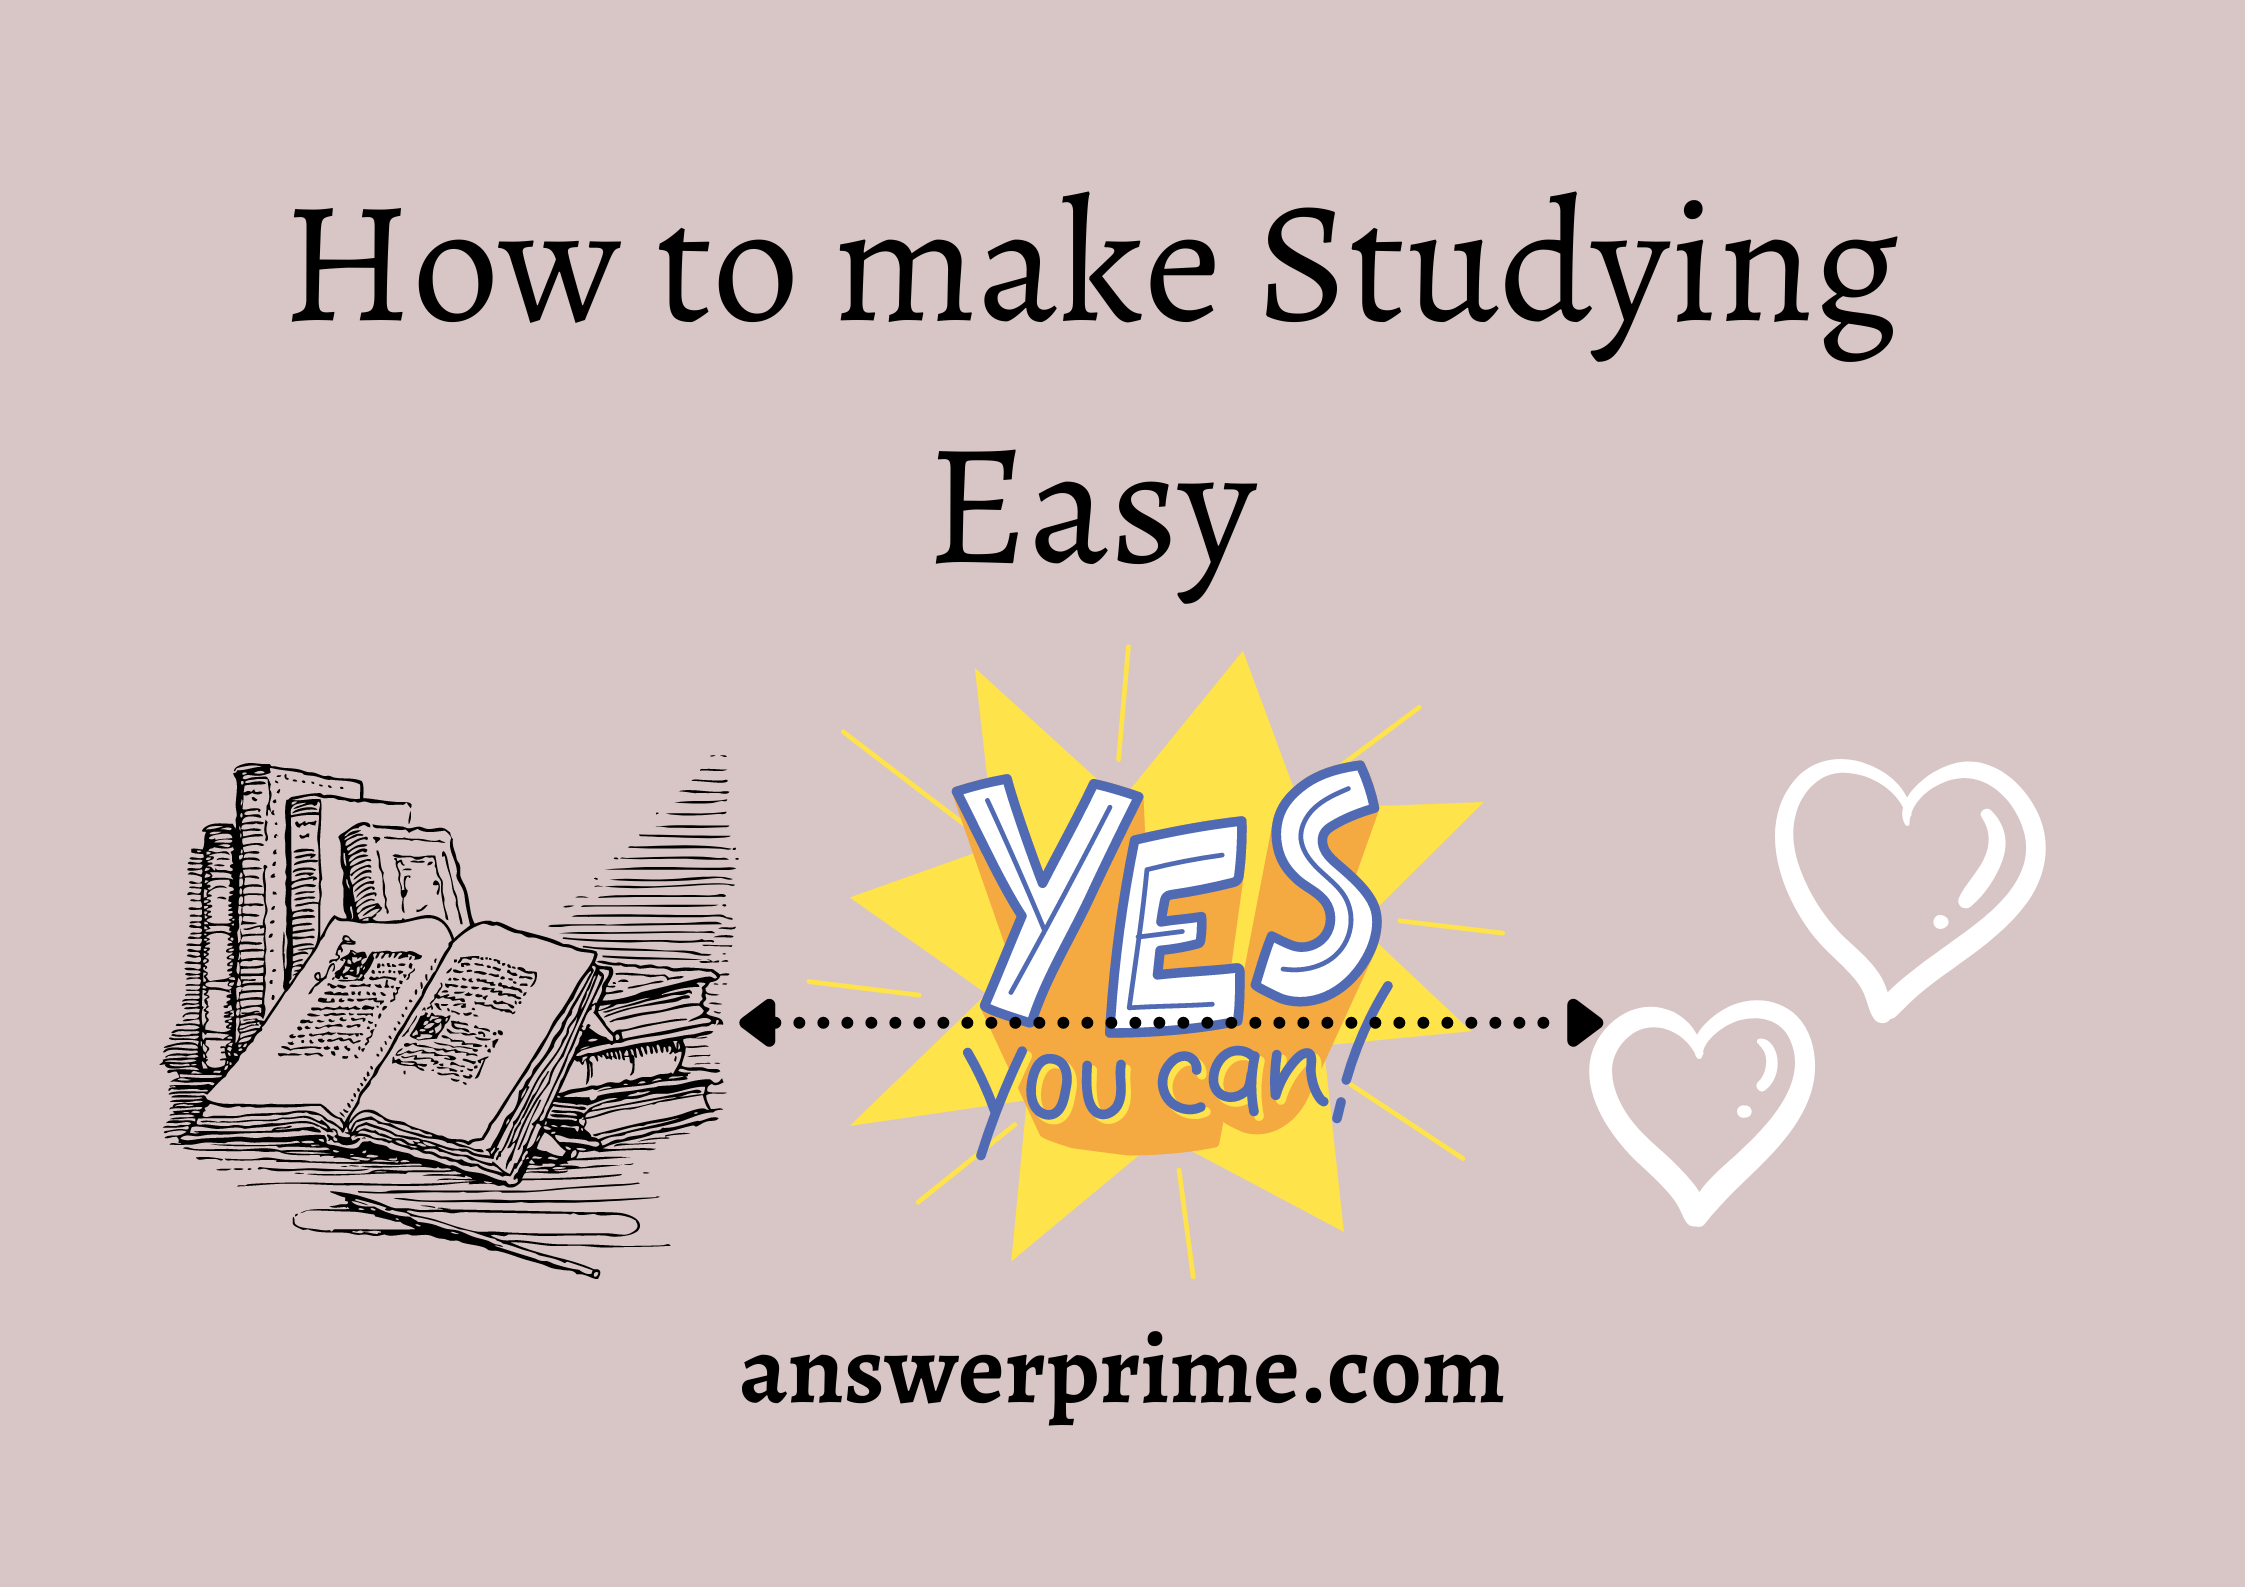 How to make Studying Easy